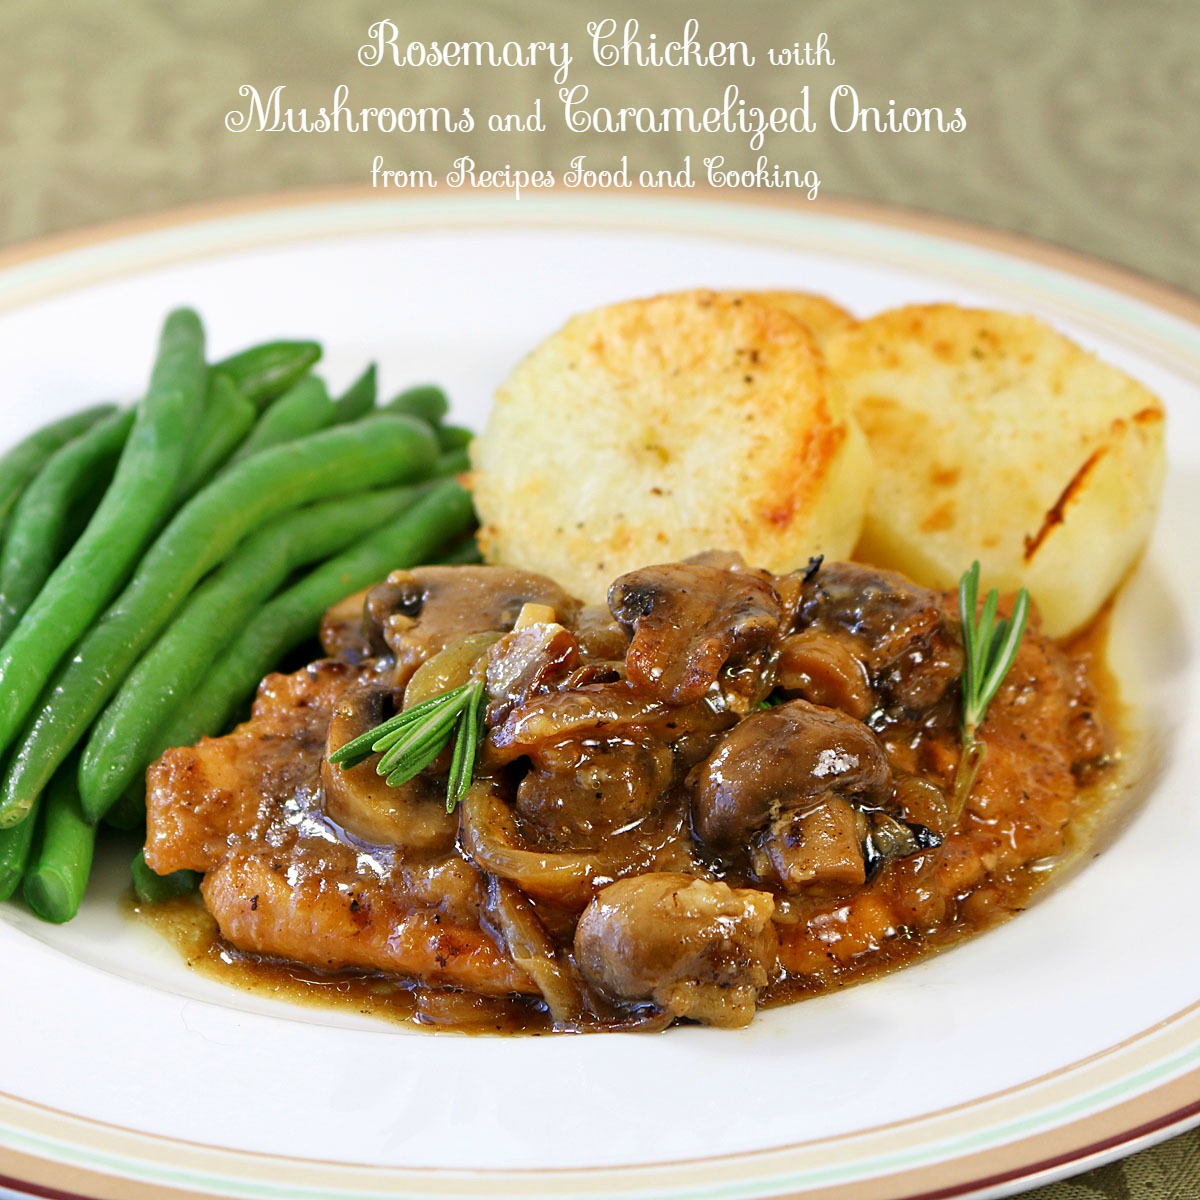 Rosemary Chicken with Mushrooms and Caramelized Onions - Recipes Food